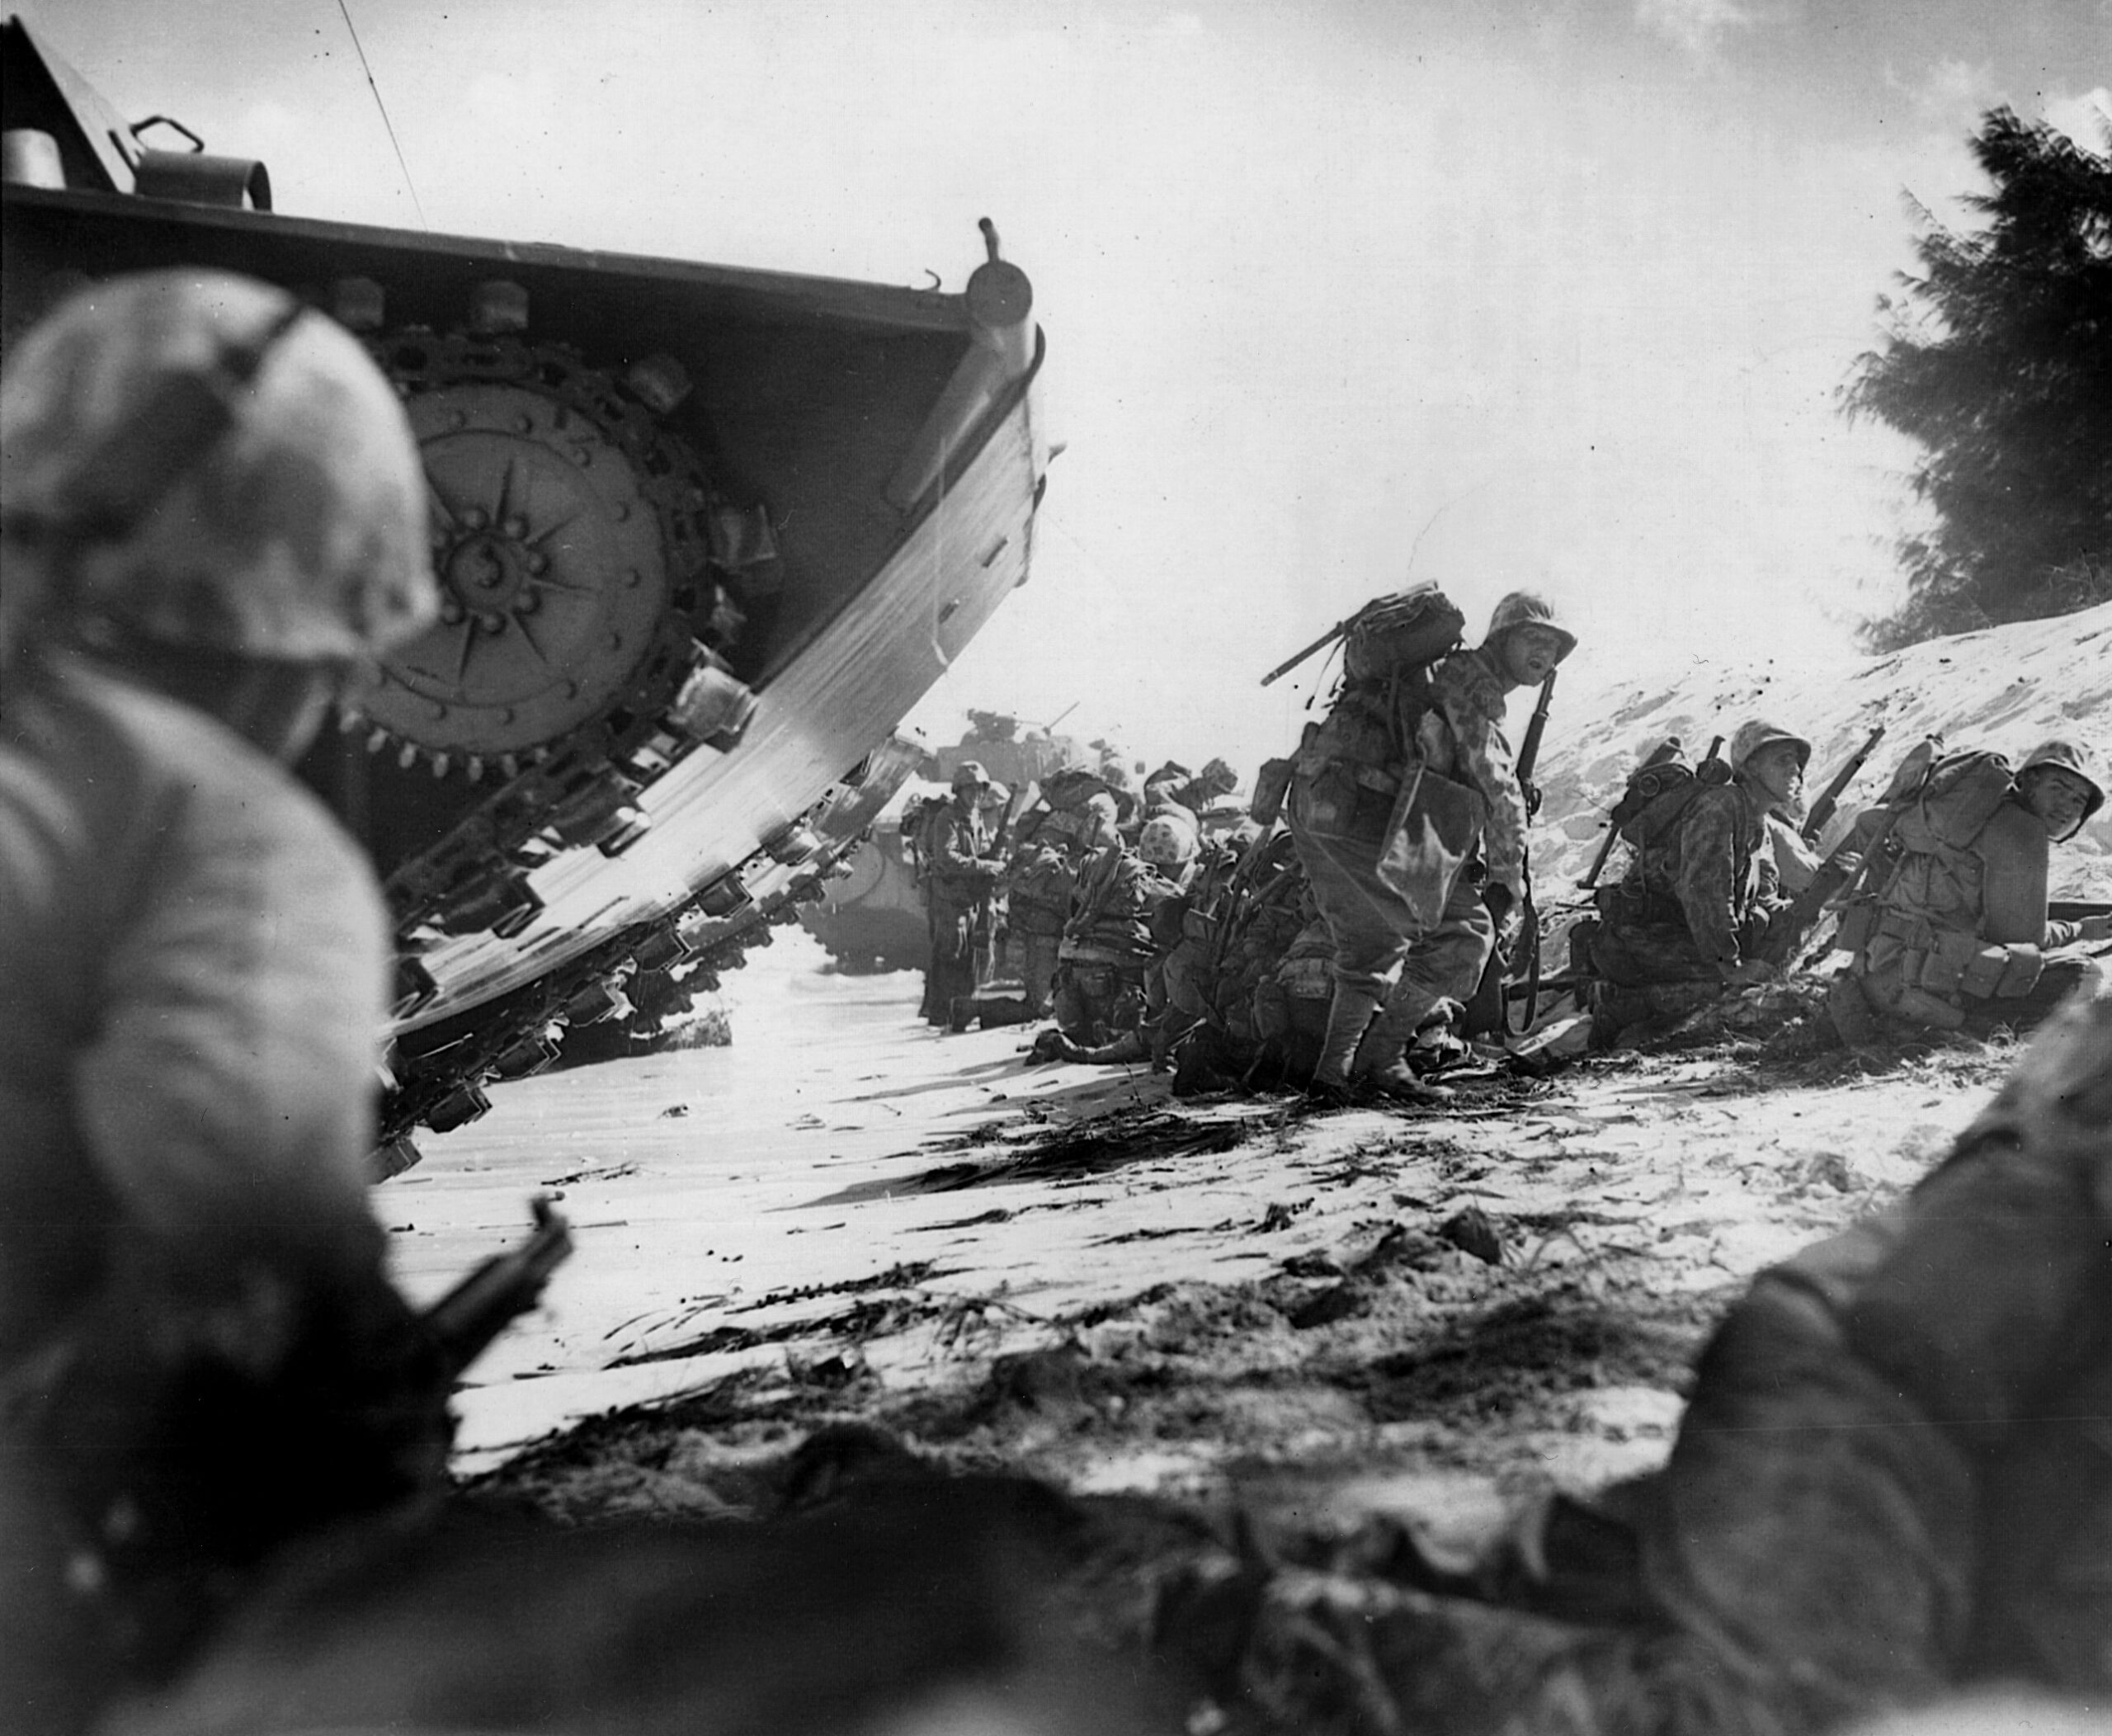 The first wave of Marines hits the beach at Saipan after disembarking their landing craft.